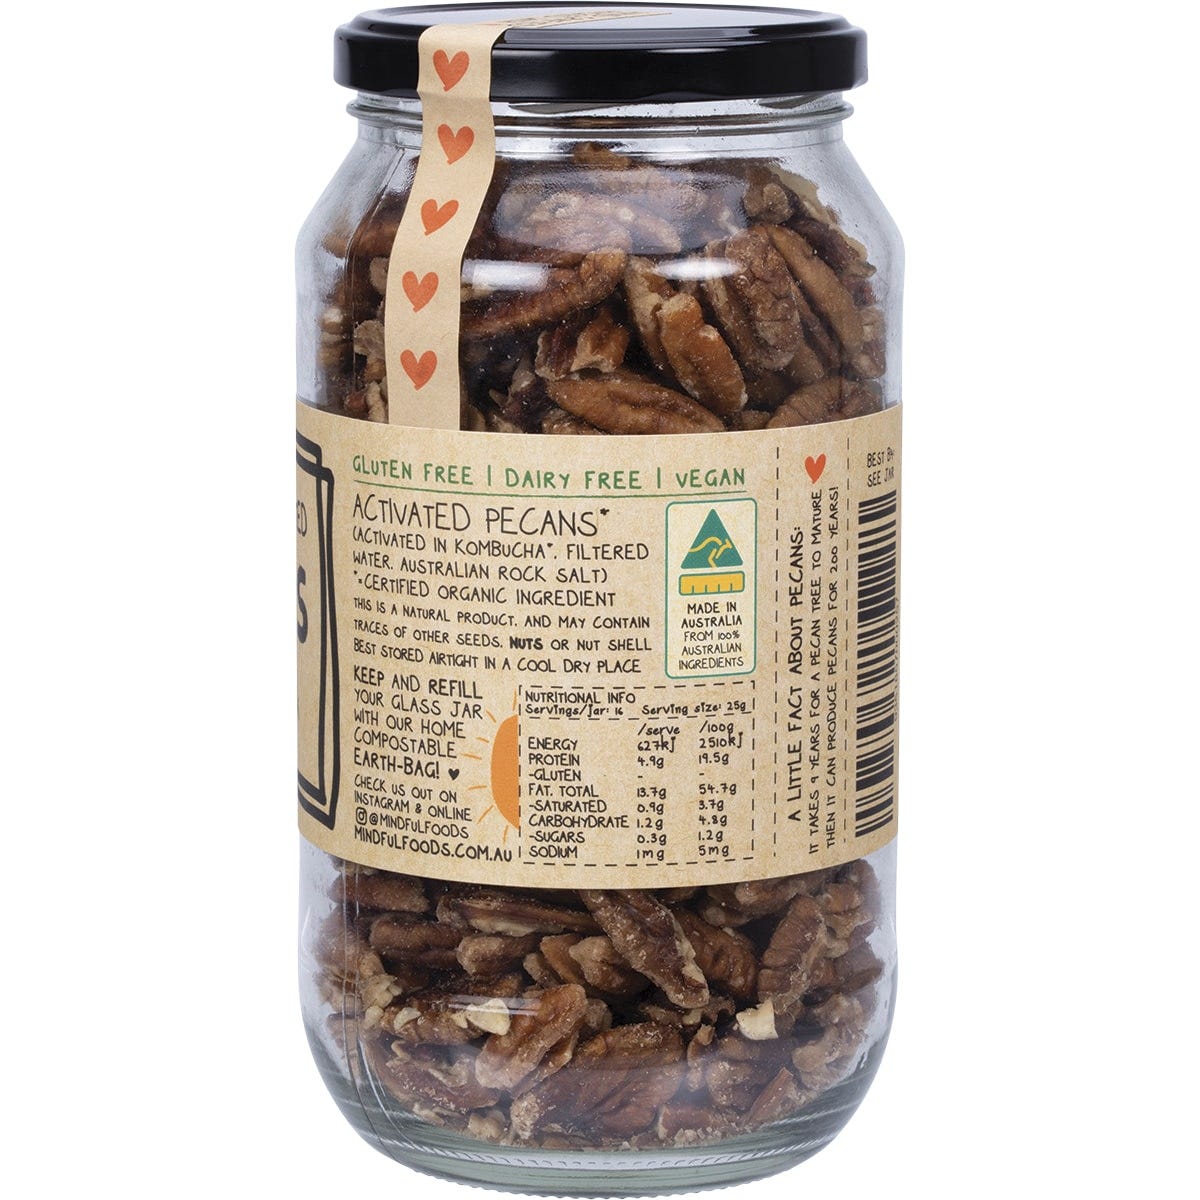 Mindful Foods Pecans Organic & Activated